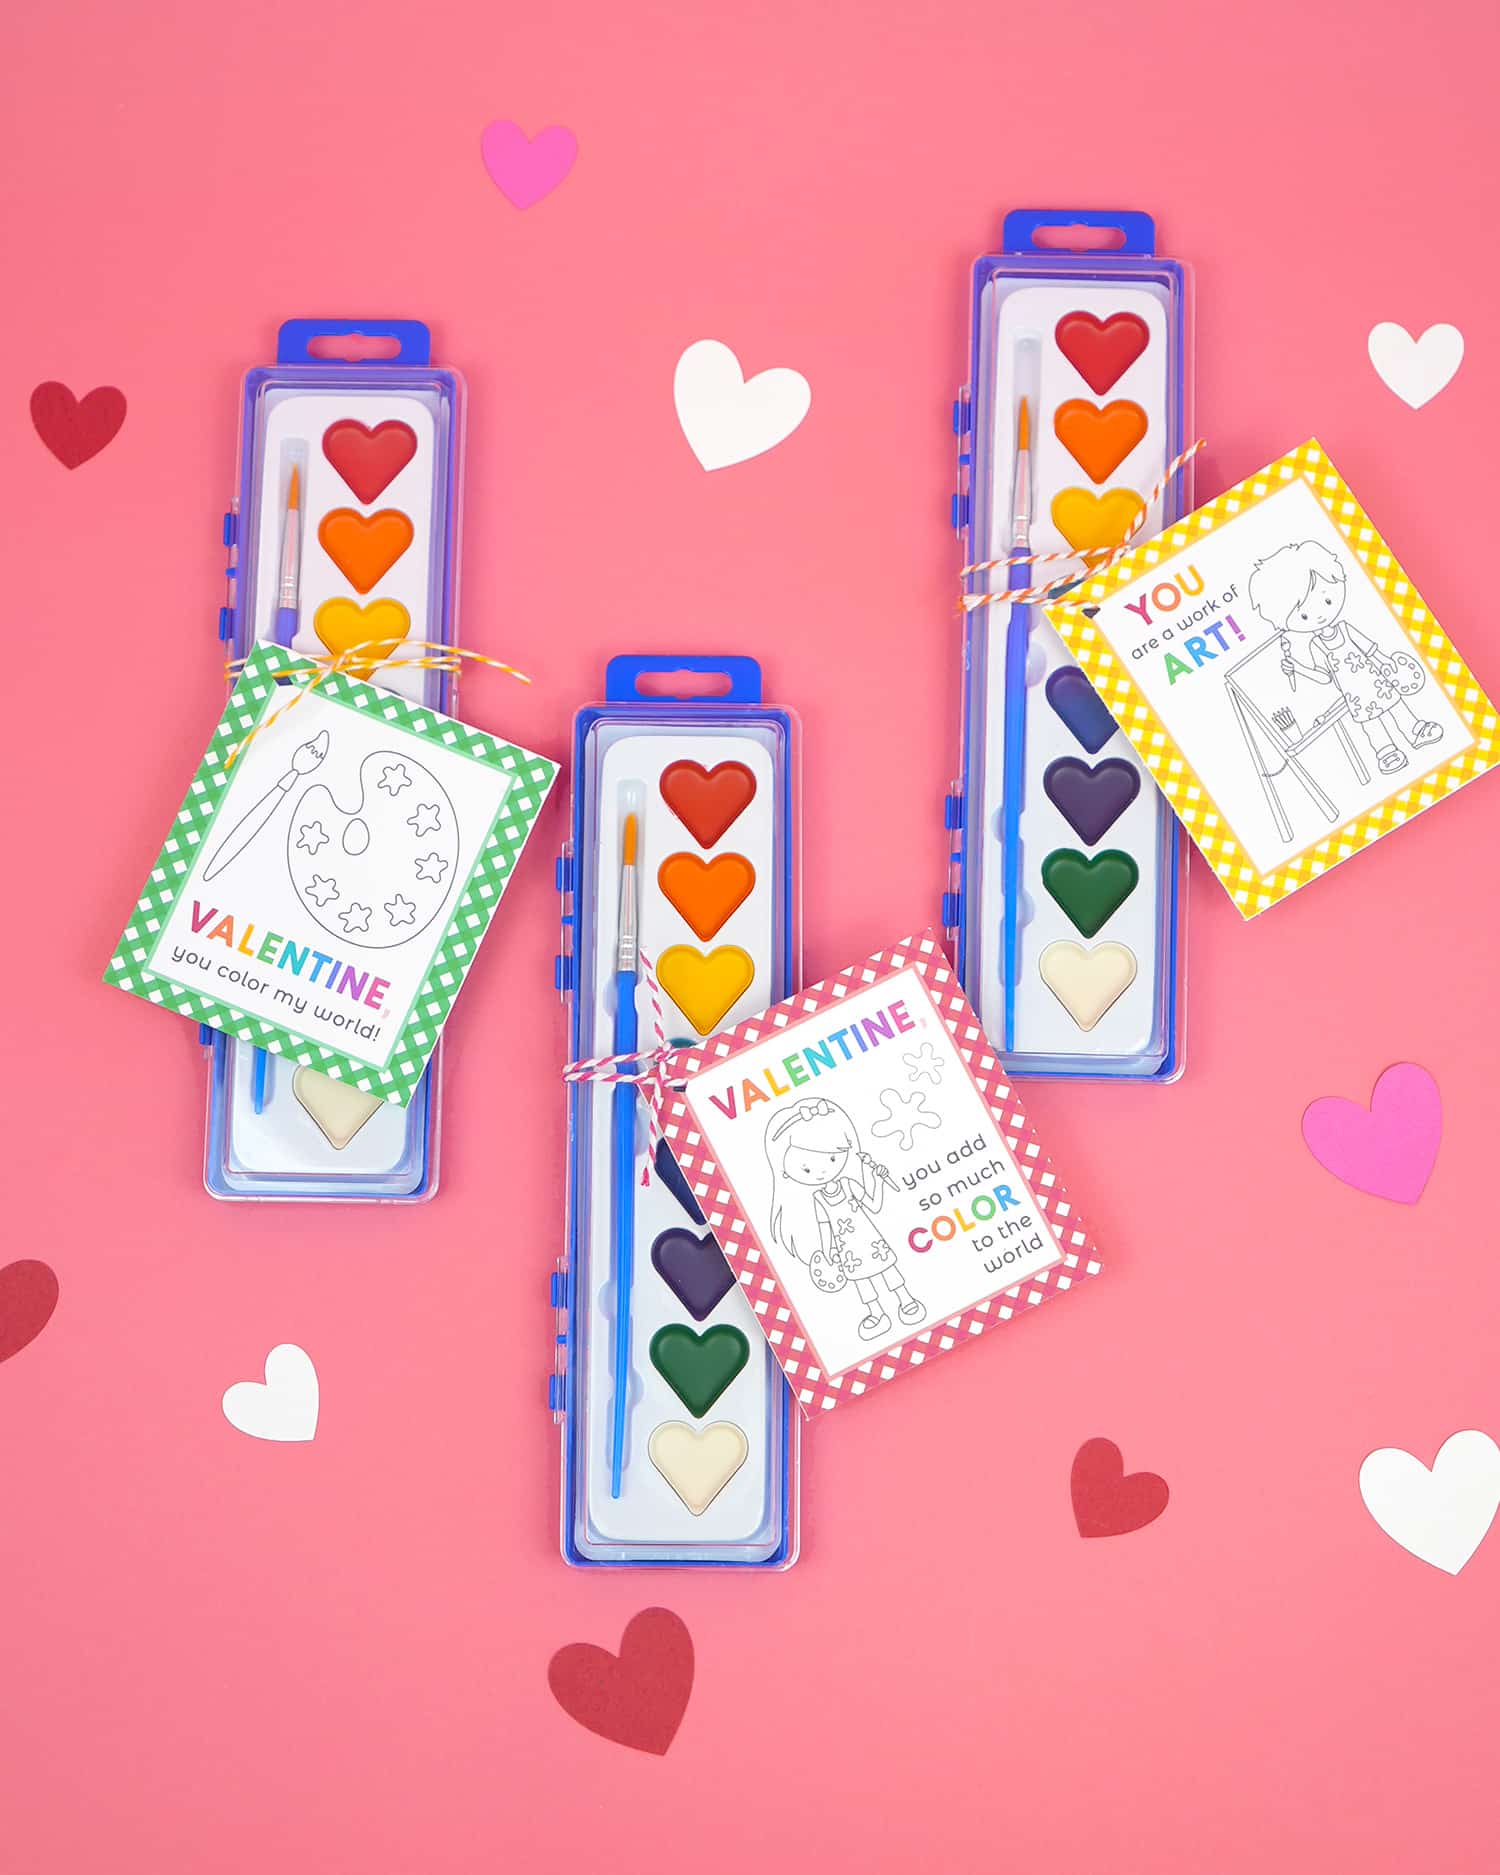 Free Printable Paint Valentines for Kids